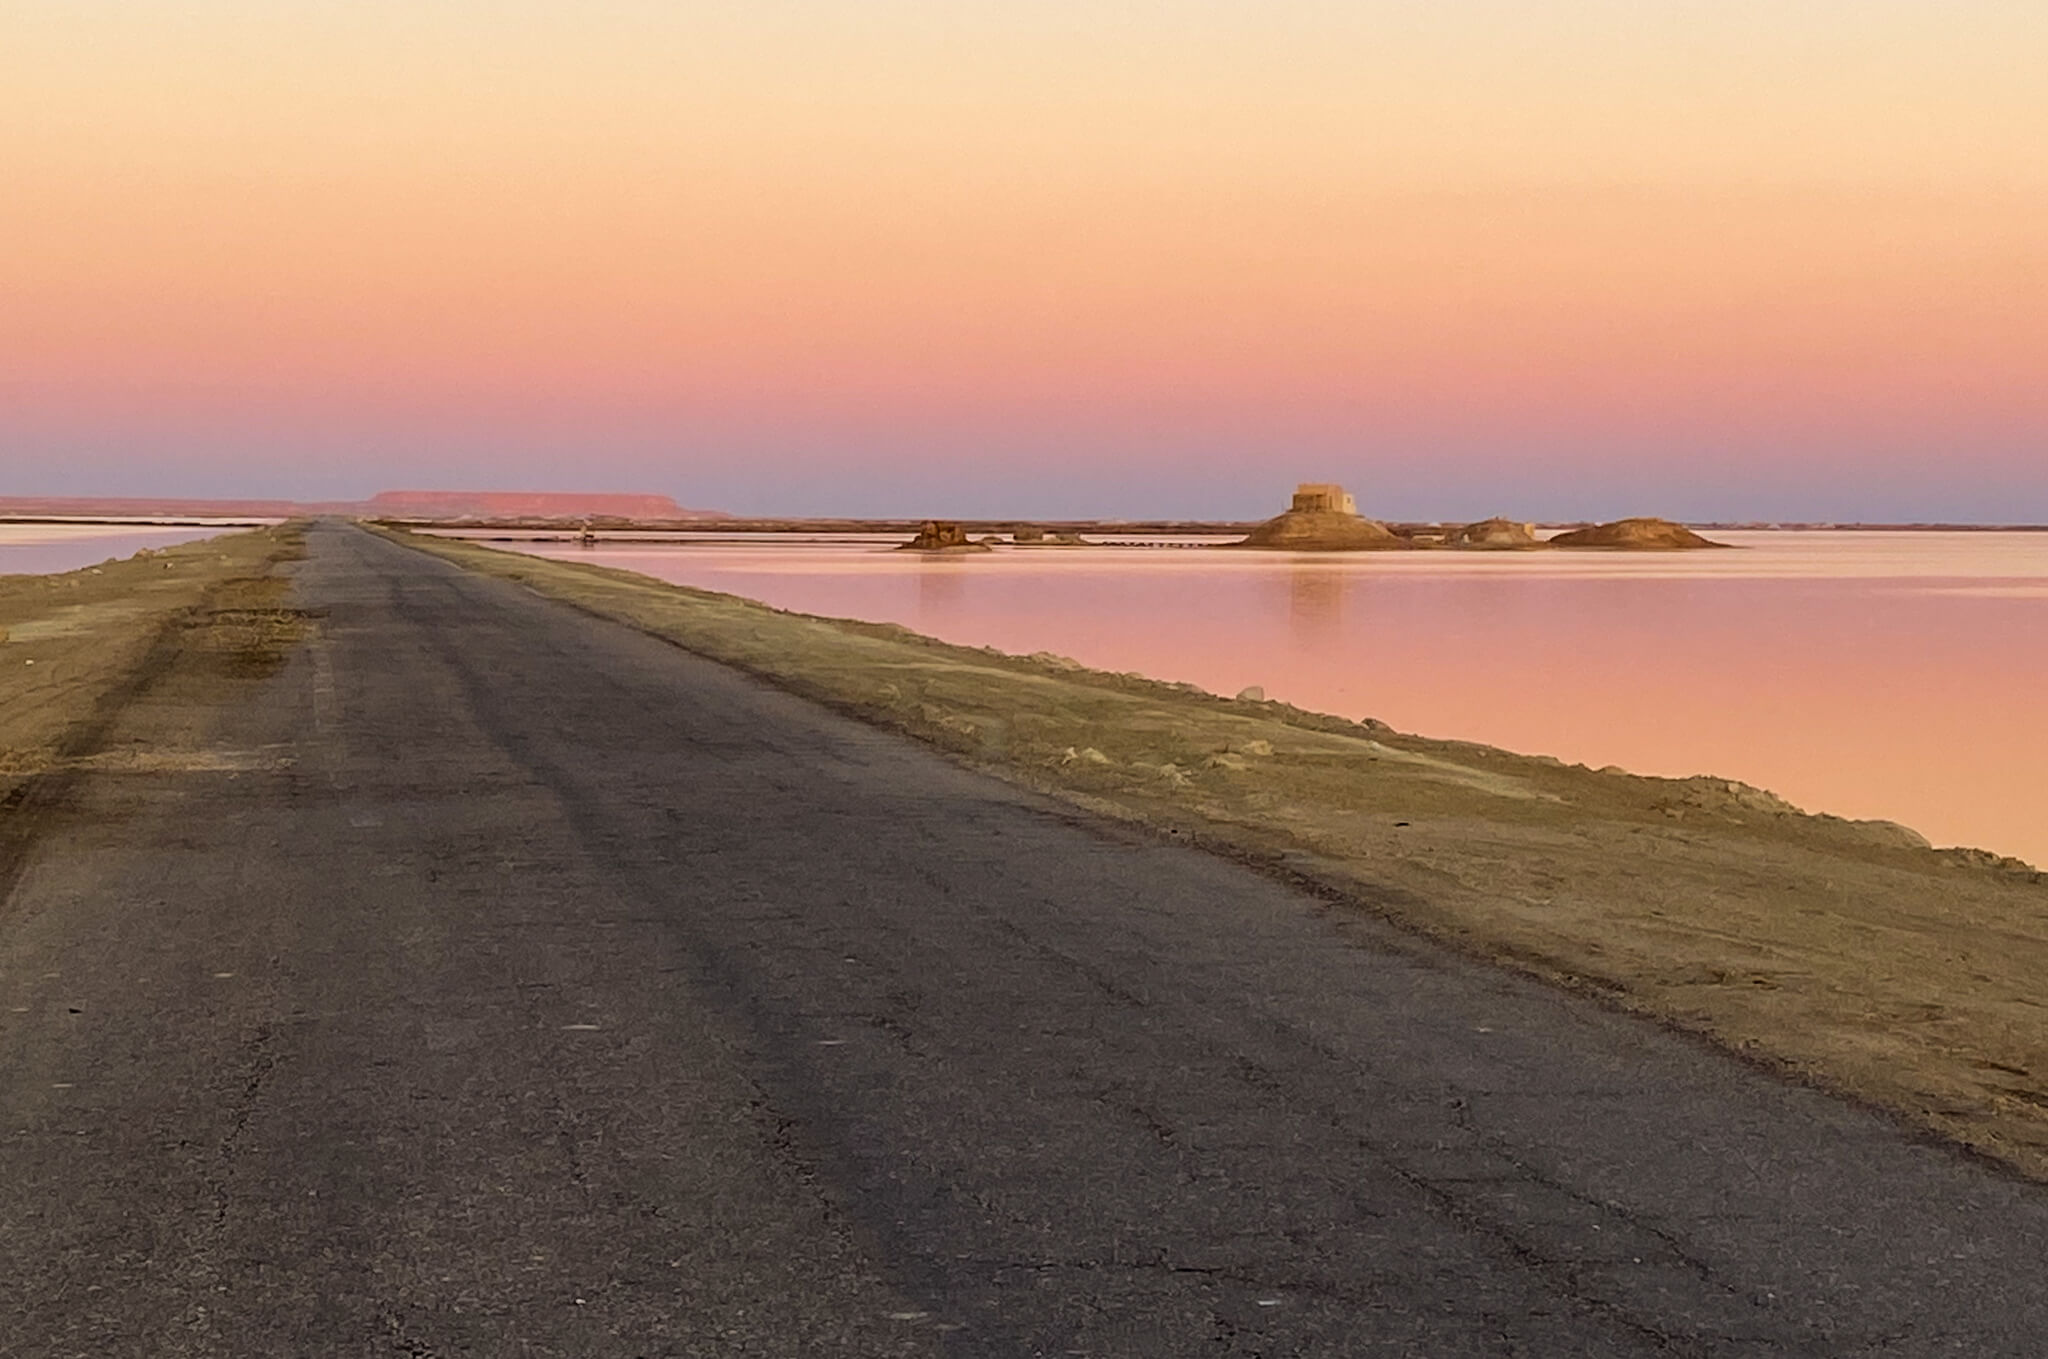 Pink skies over a lake of the Siwa Oasis with a string of islands next to the long straight road.